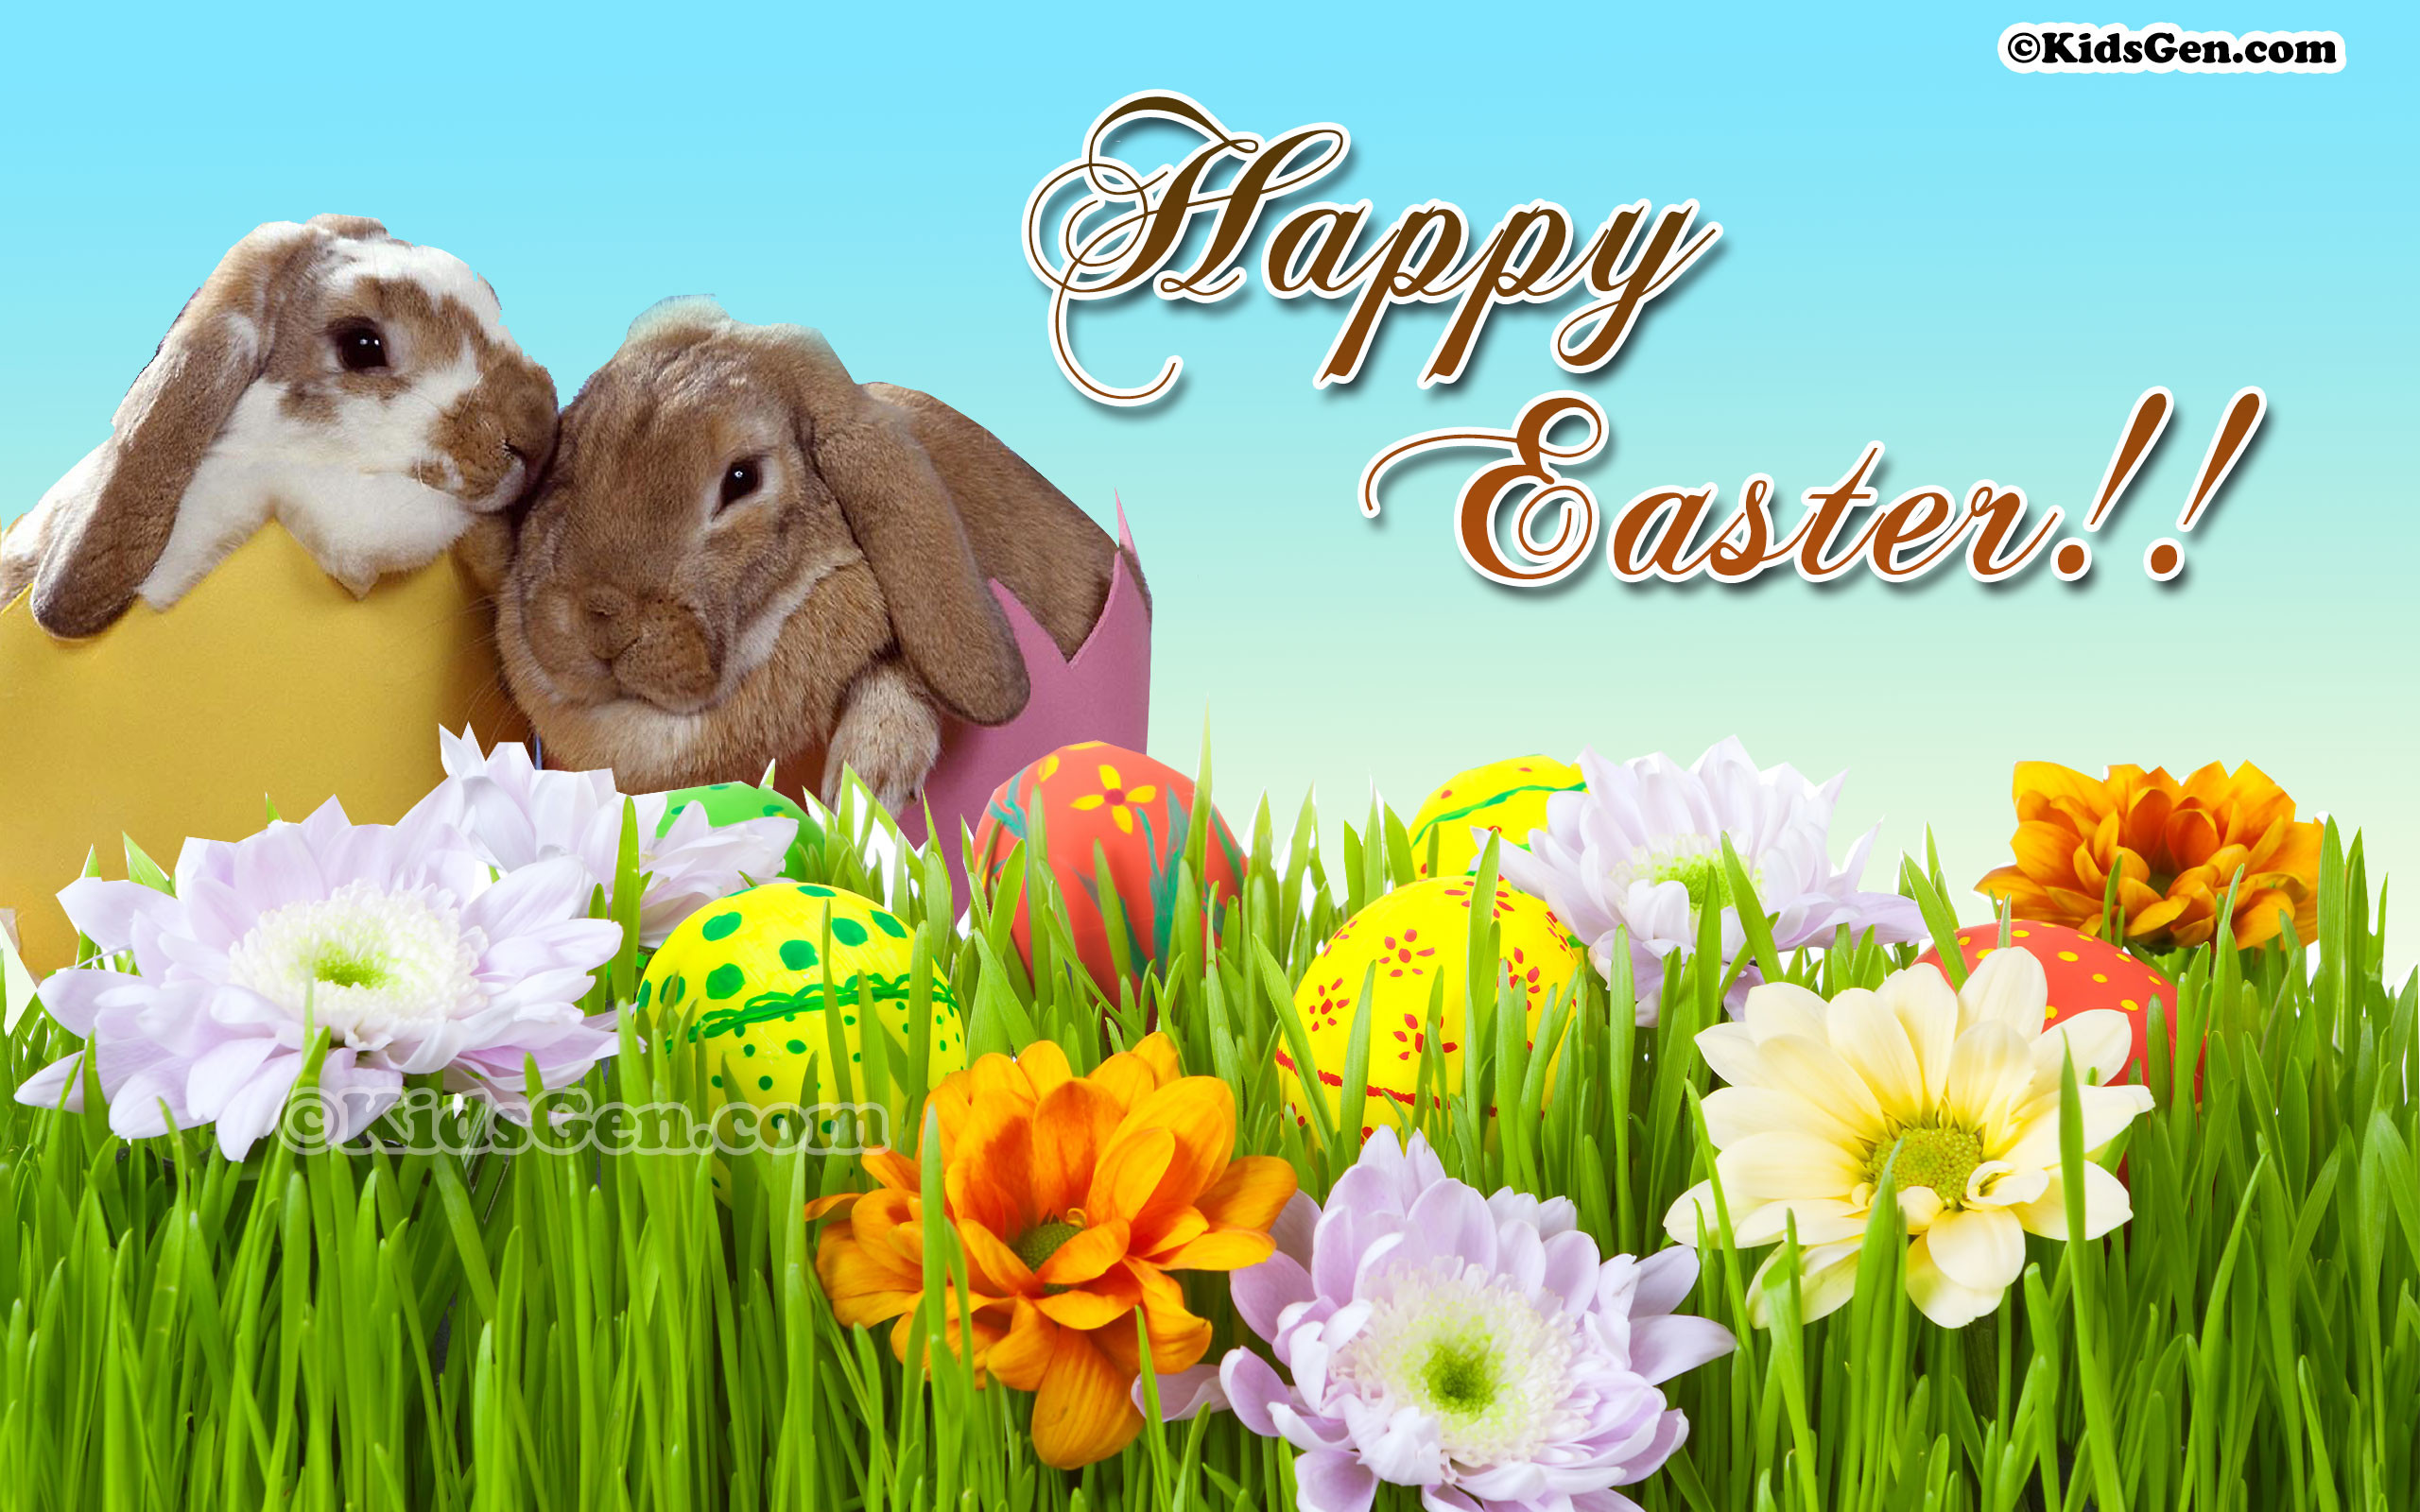 2560x1600 HD Wallpaper for kids with Happy Easter wishes